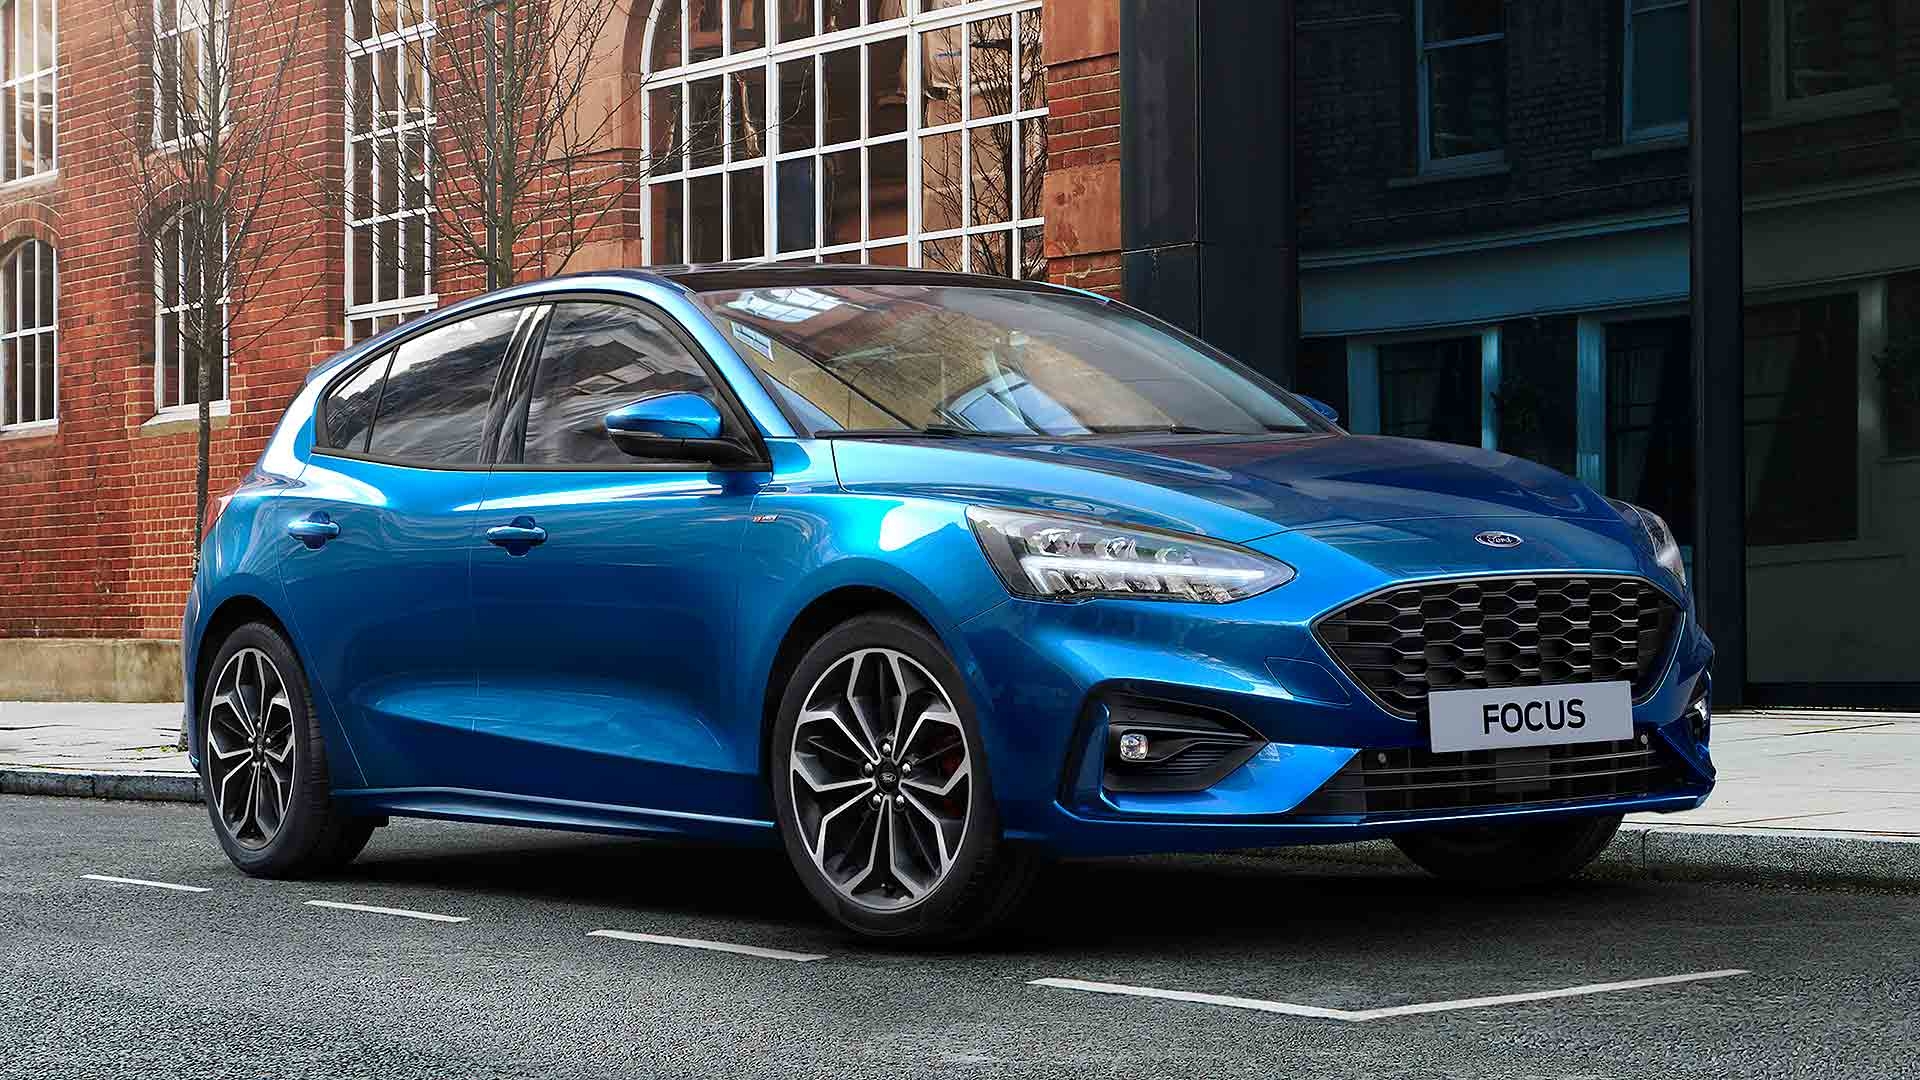 Ford Focus now available with mild hybrid tech